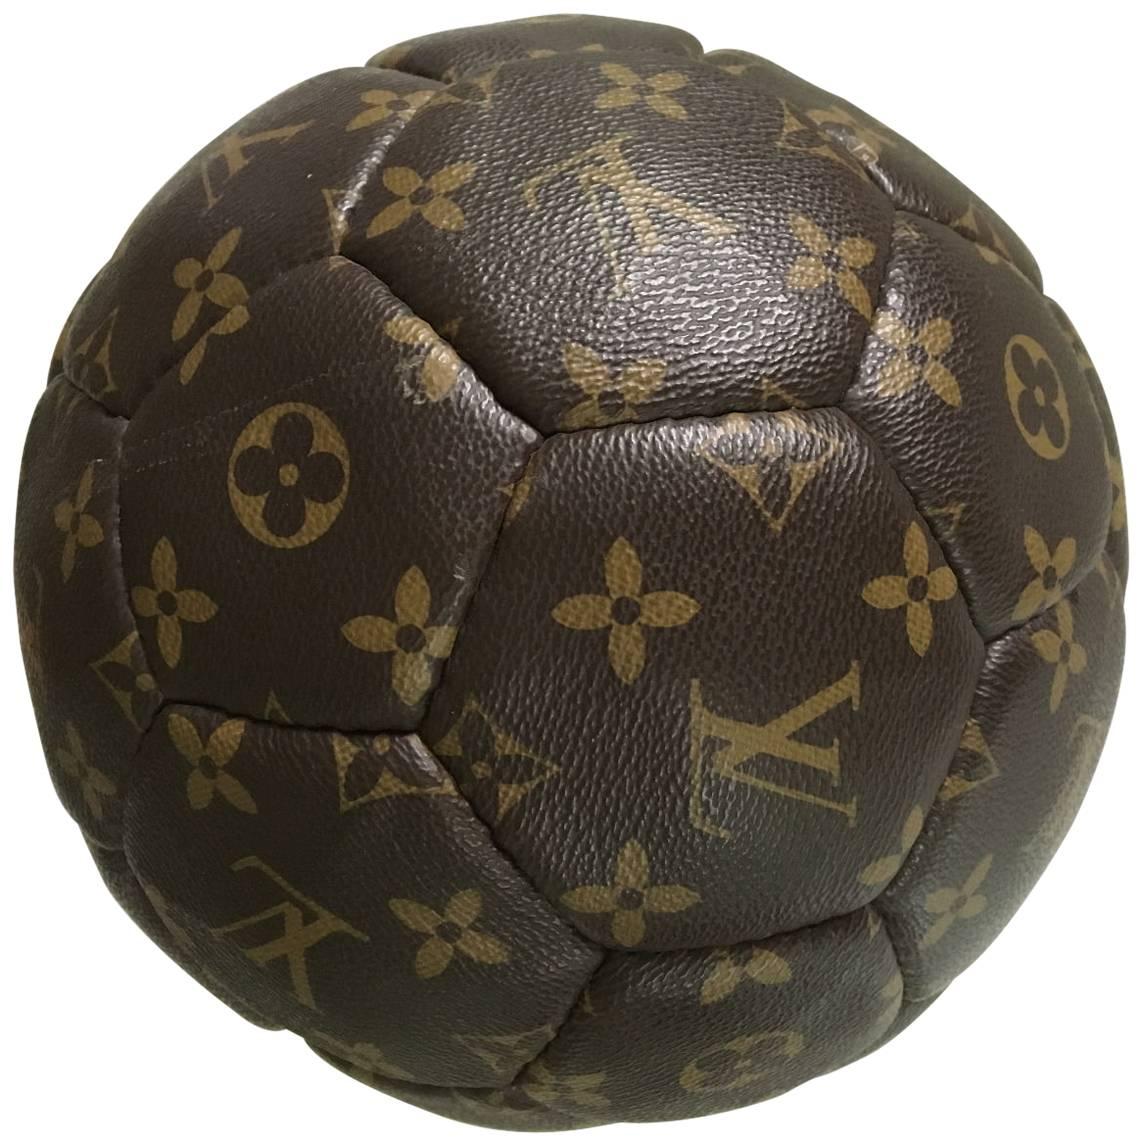 Limited edition France 98 Louis Vuitton Football Ball with Leather Strap